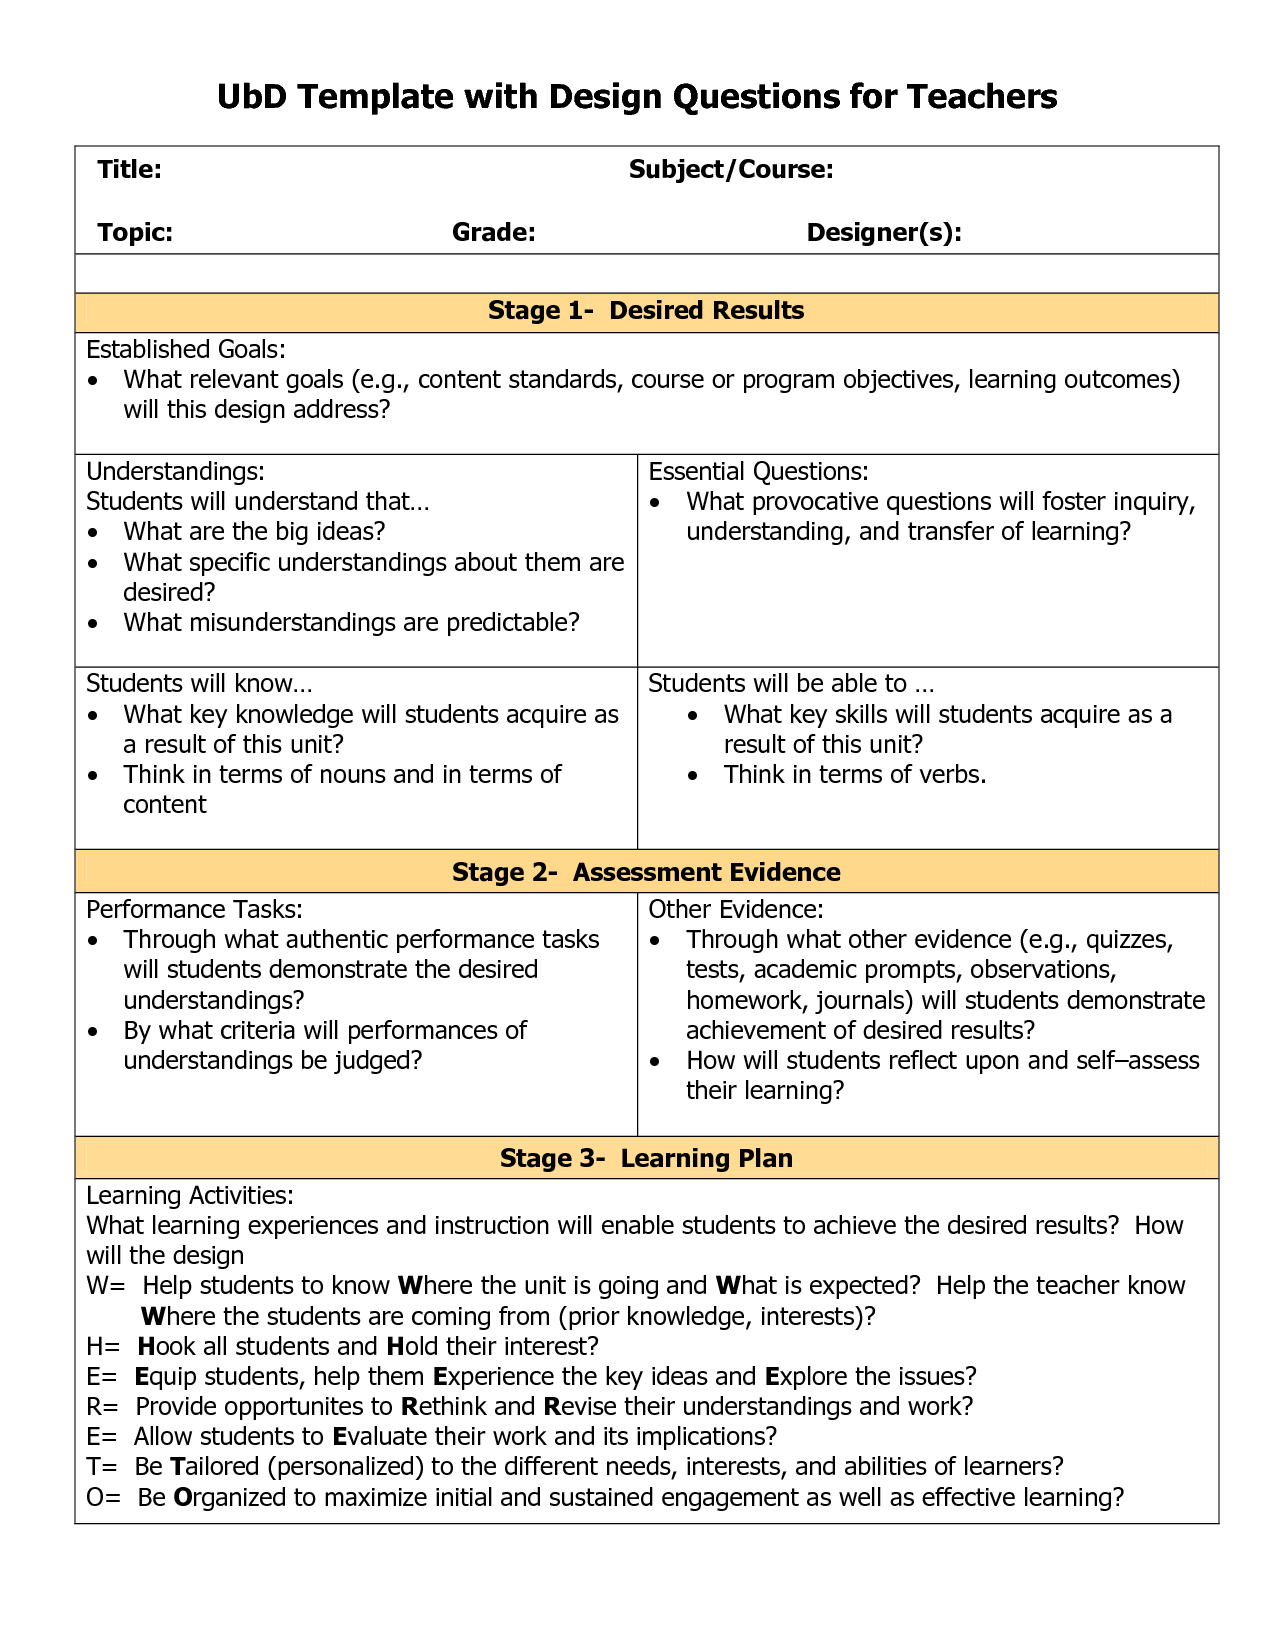 Blank Ubd Planning Template - Doc | Lesson Plan Templates